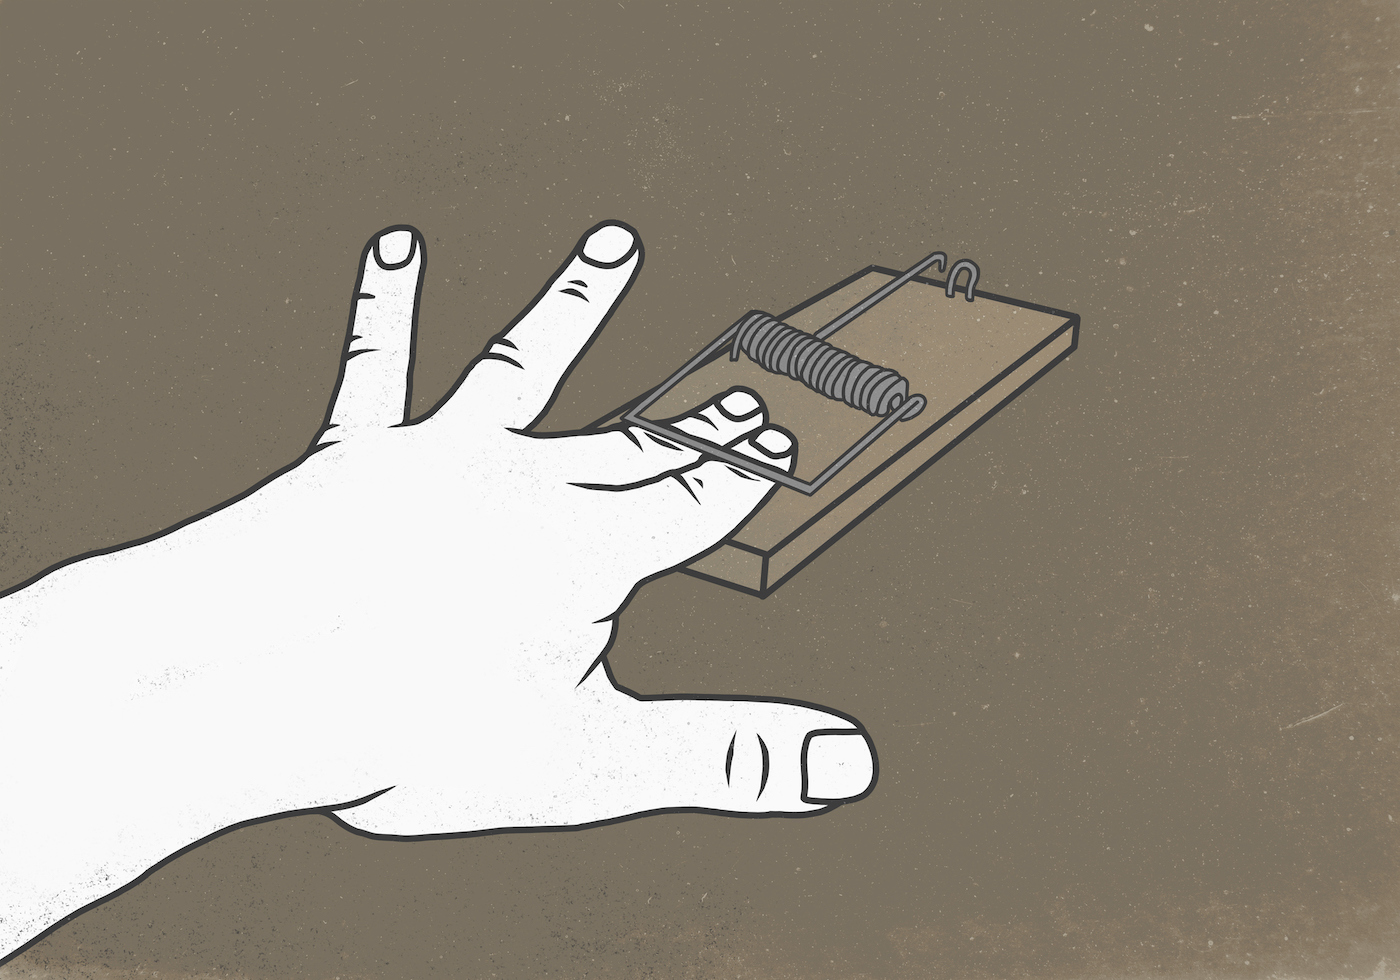 Illustration of fingers in mousetrap against colored background representing trapped